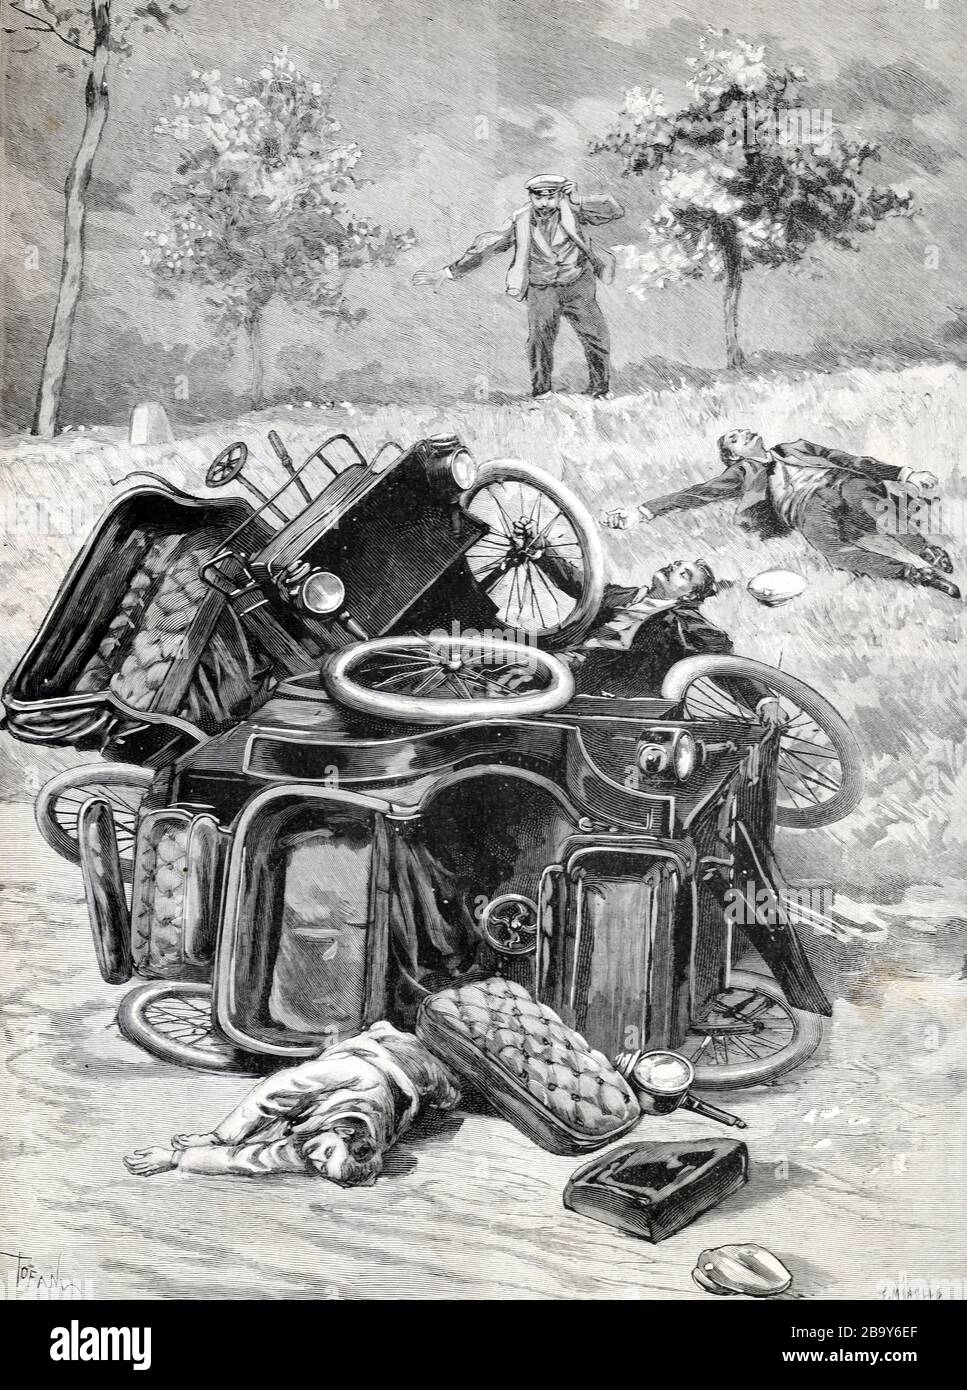 Early Car Accident, Road Accident, Traffic Accident or Motor Accident 1898. Vintage or Old Illustration Stock Photo